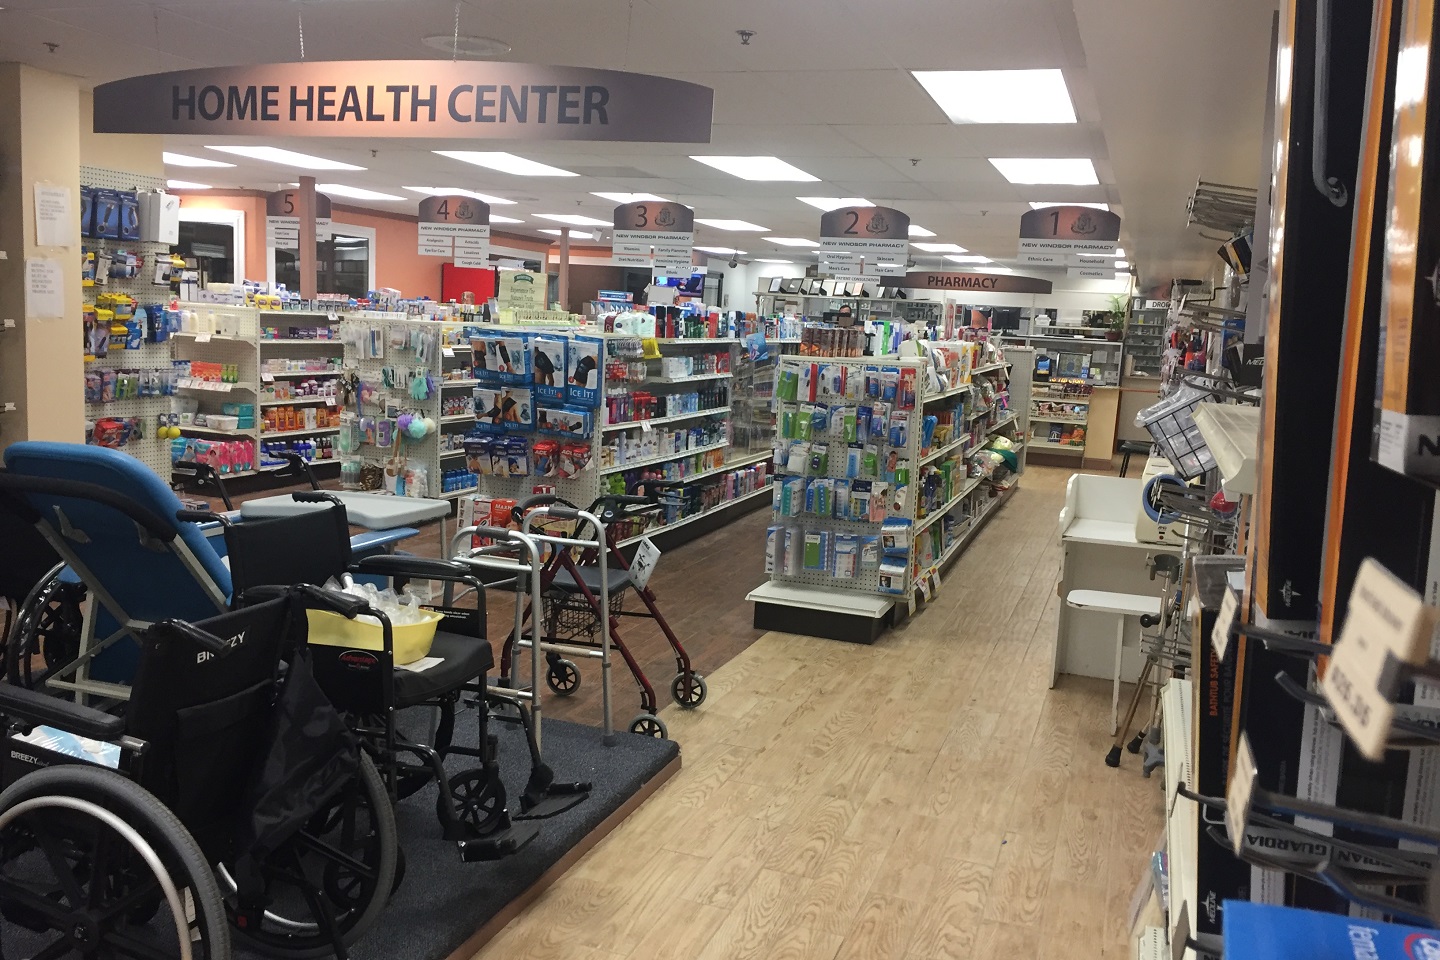 New Windsor Pharmacy and Home Healthcare Center